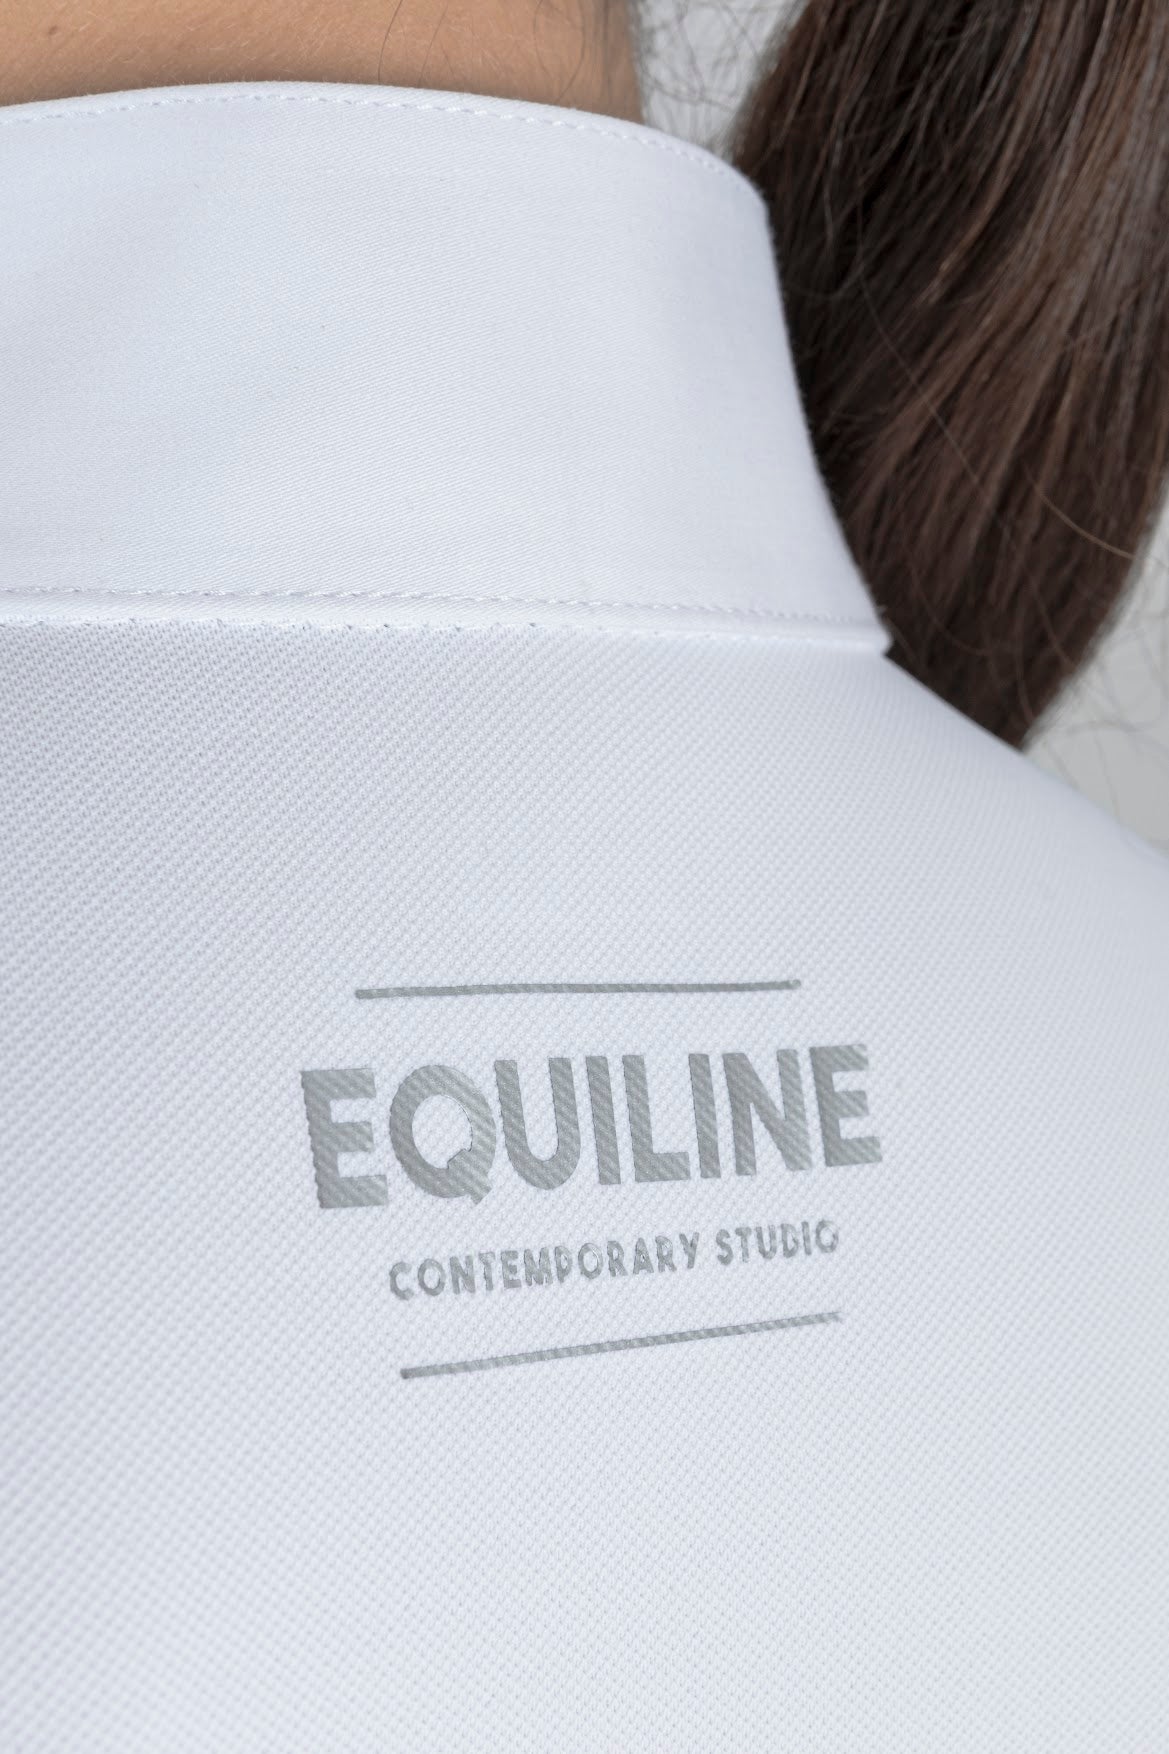 Equiline Womens Long Sleeve Textures Technical Show Shirt